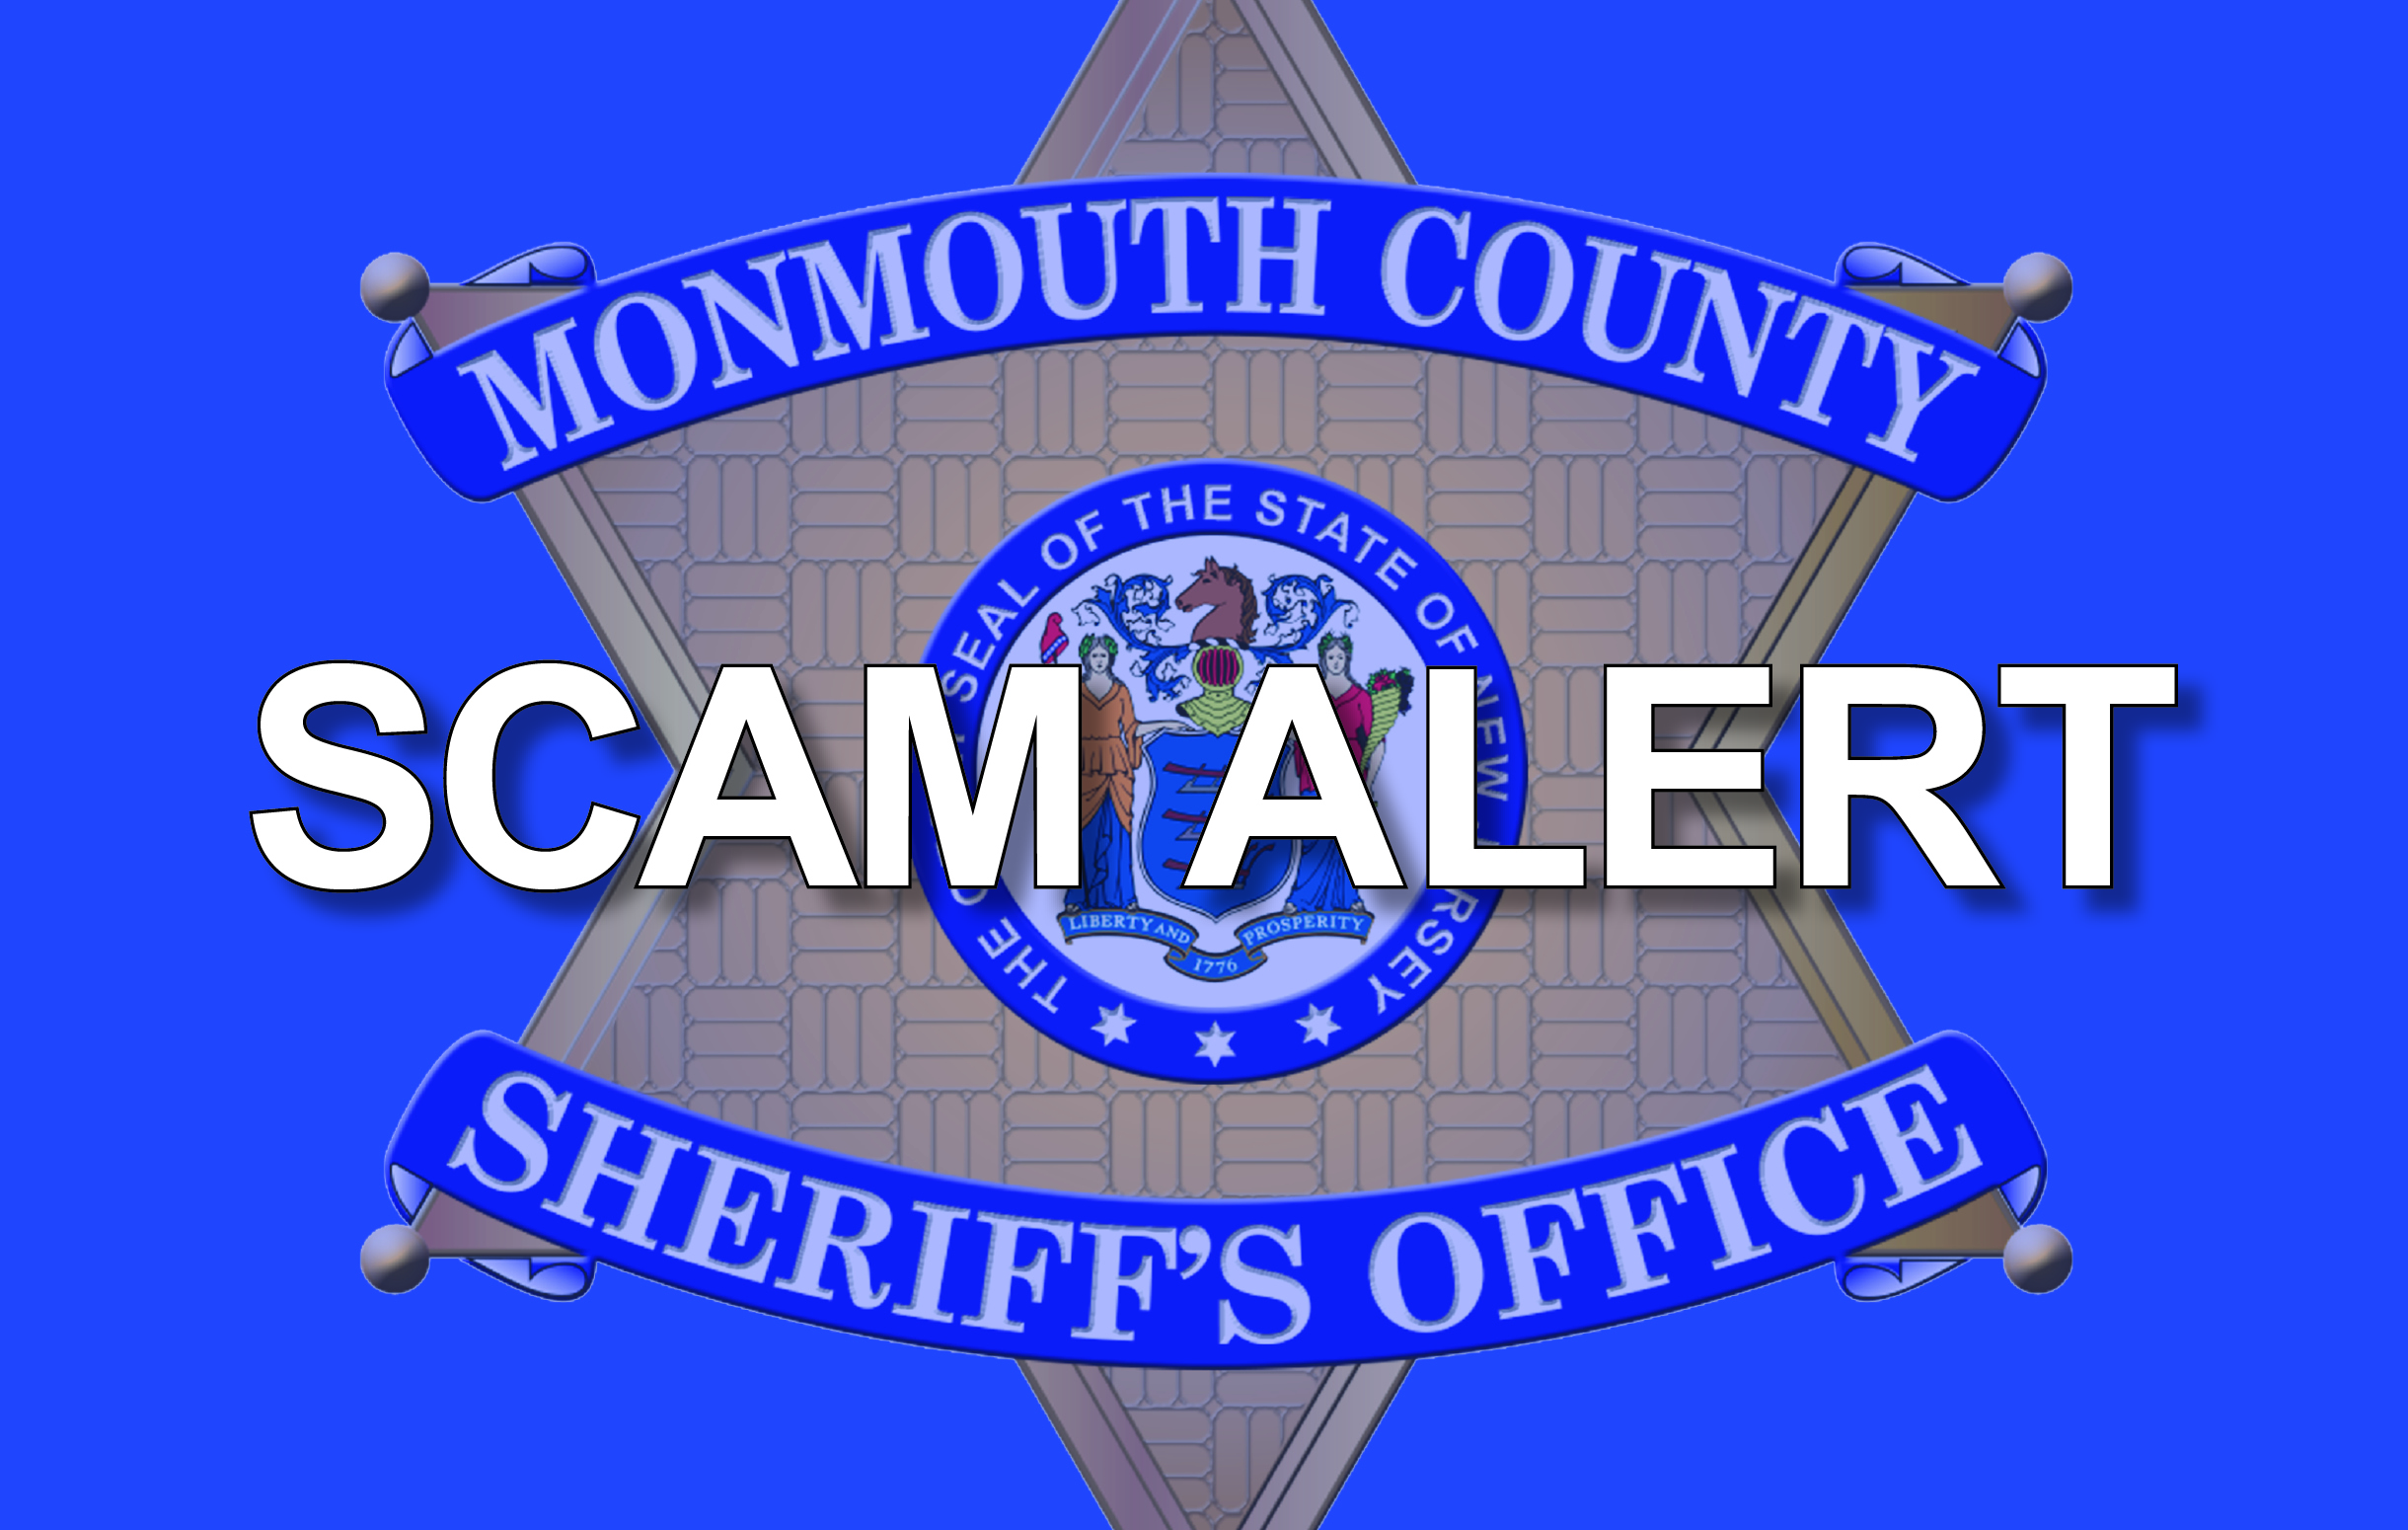 Monmouth County Sheriffs Office Warns To Beware Of Phone Scams And Spoofing As Calls Are On The Rise Monmouth County Sheriffs Office